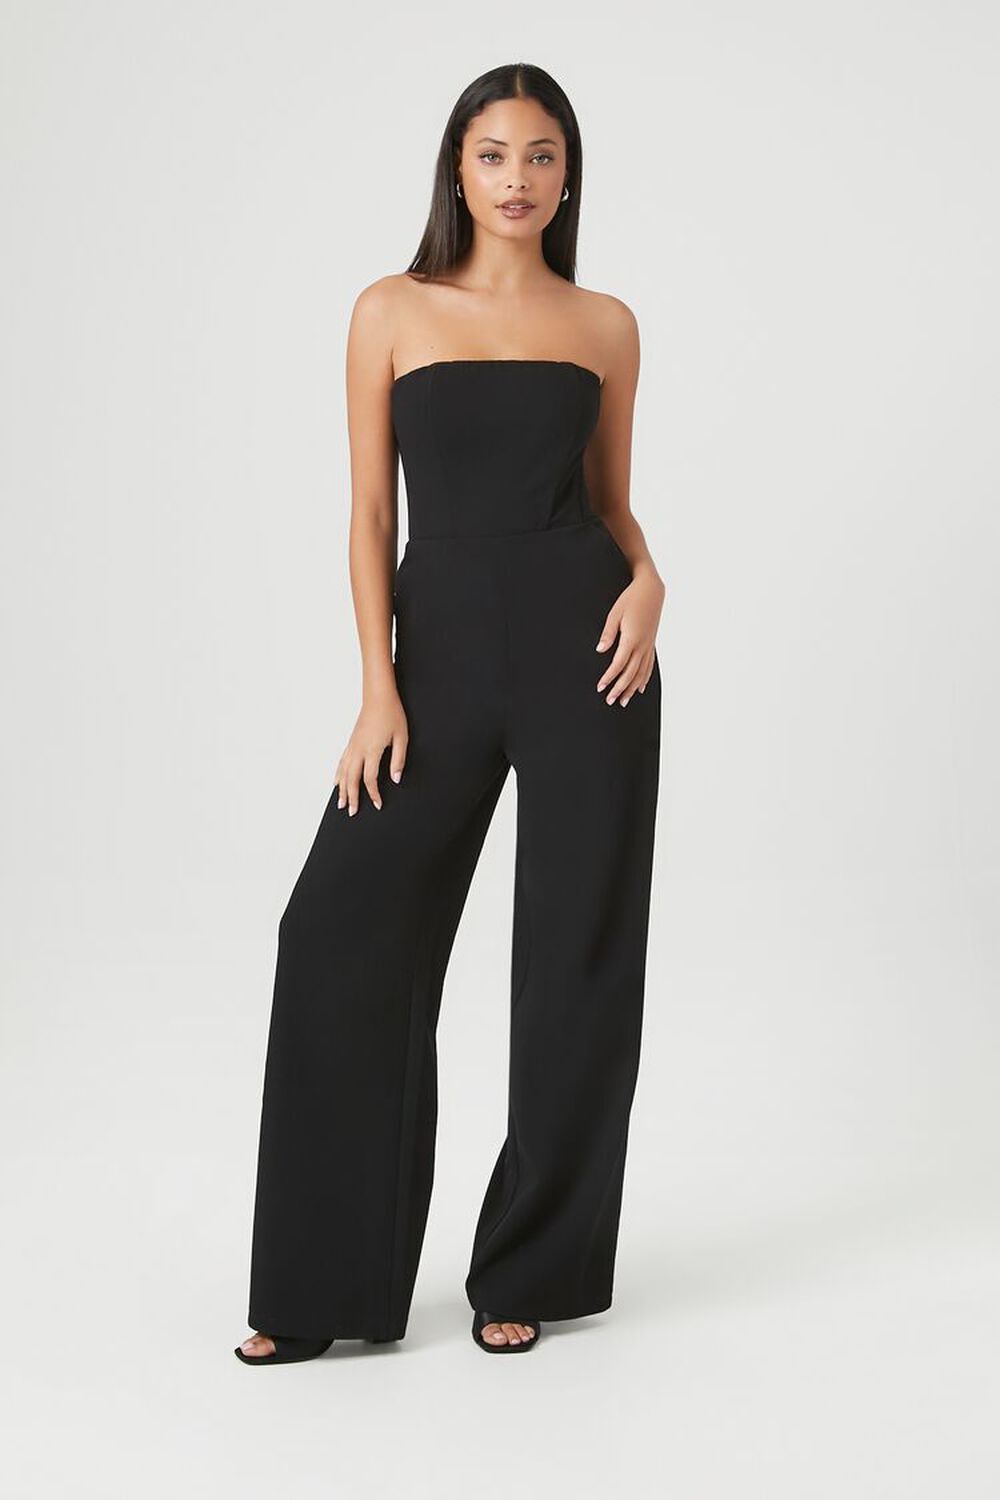 Strapless Lace Up Loose Stretch Wide Leg Jumpsuit  Wide leg jumpsuit, Bandeau  jumpsuit, Strapless jumpsuit